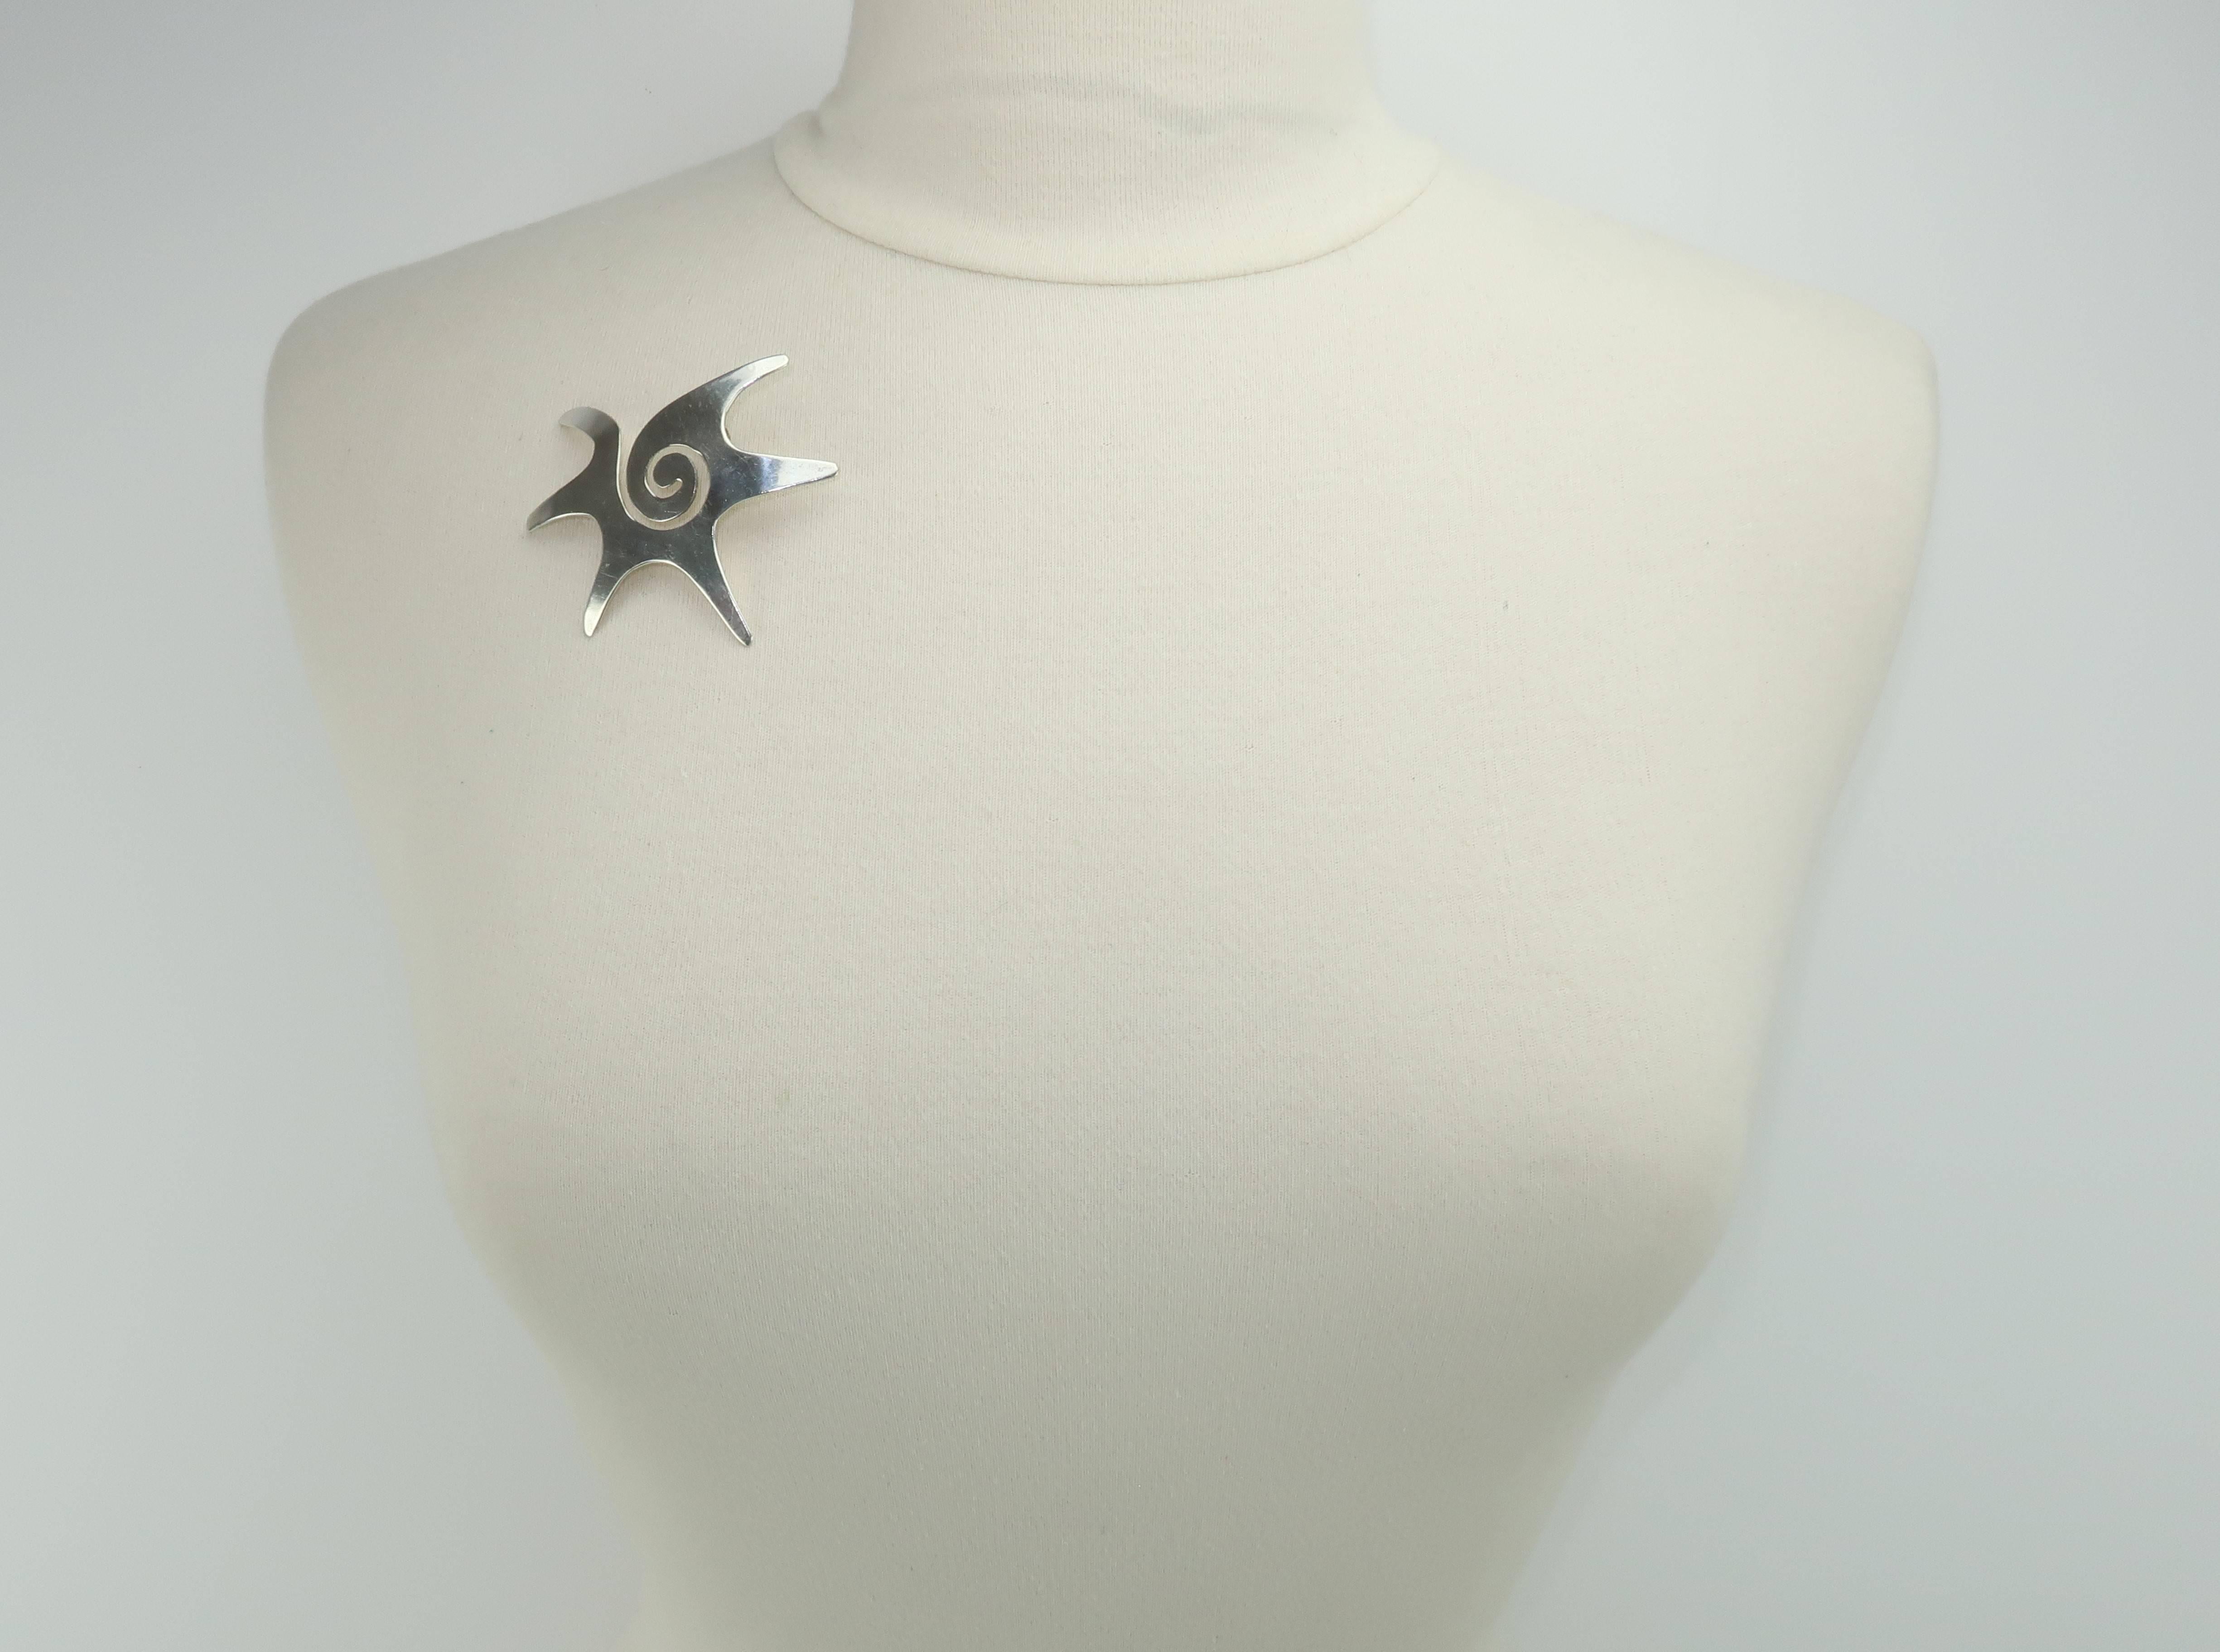 Superior Mexican sterling silver craftsmanship is united with a 1960's abstract modernist form to create a sterling silver Taxco hallmarked brooch with eye popping style.  The abstract silhouette is reminiscent of William Spratling's starfish design